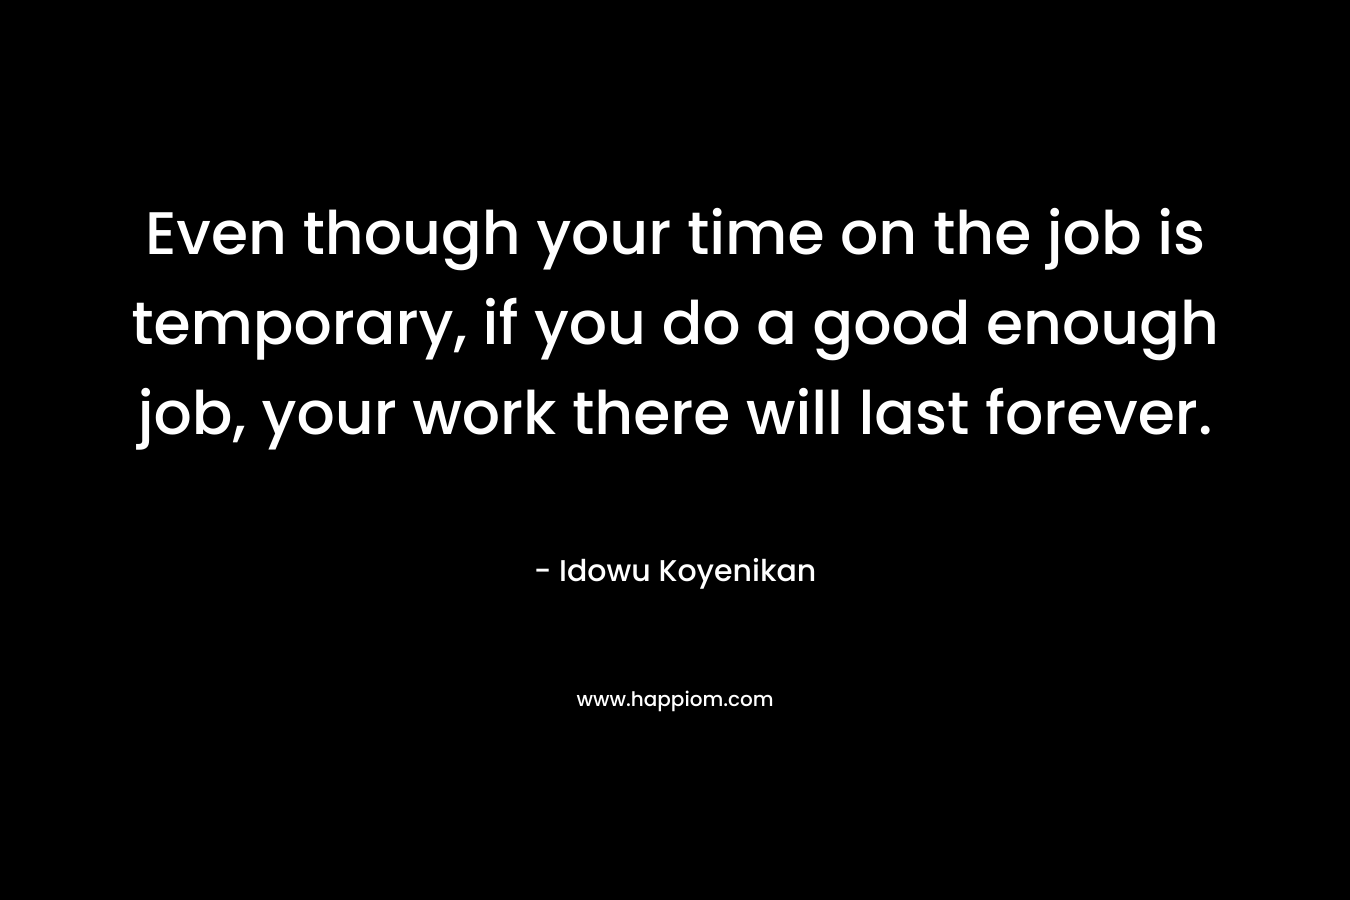 Even though your time on the job is temporary, if you do a good enough job, your work there will last forever.